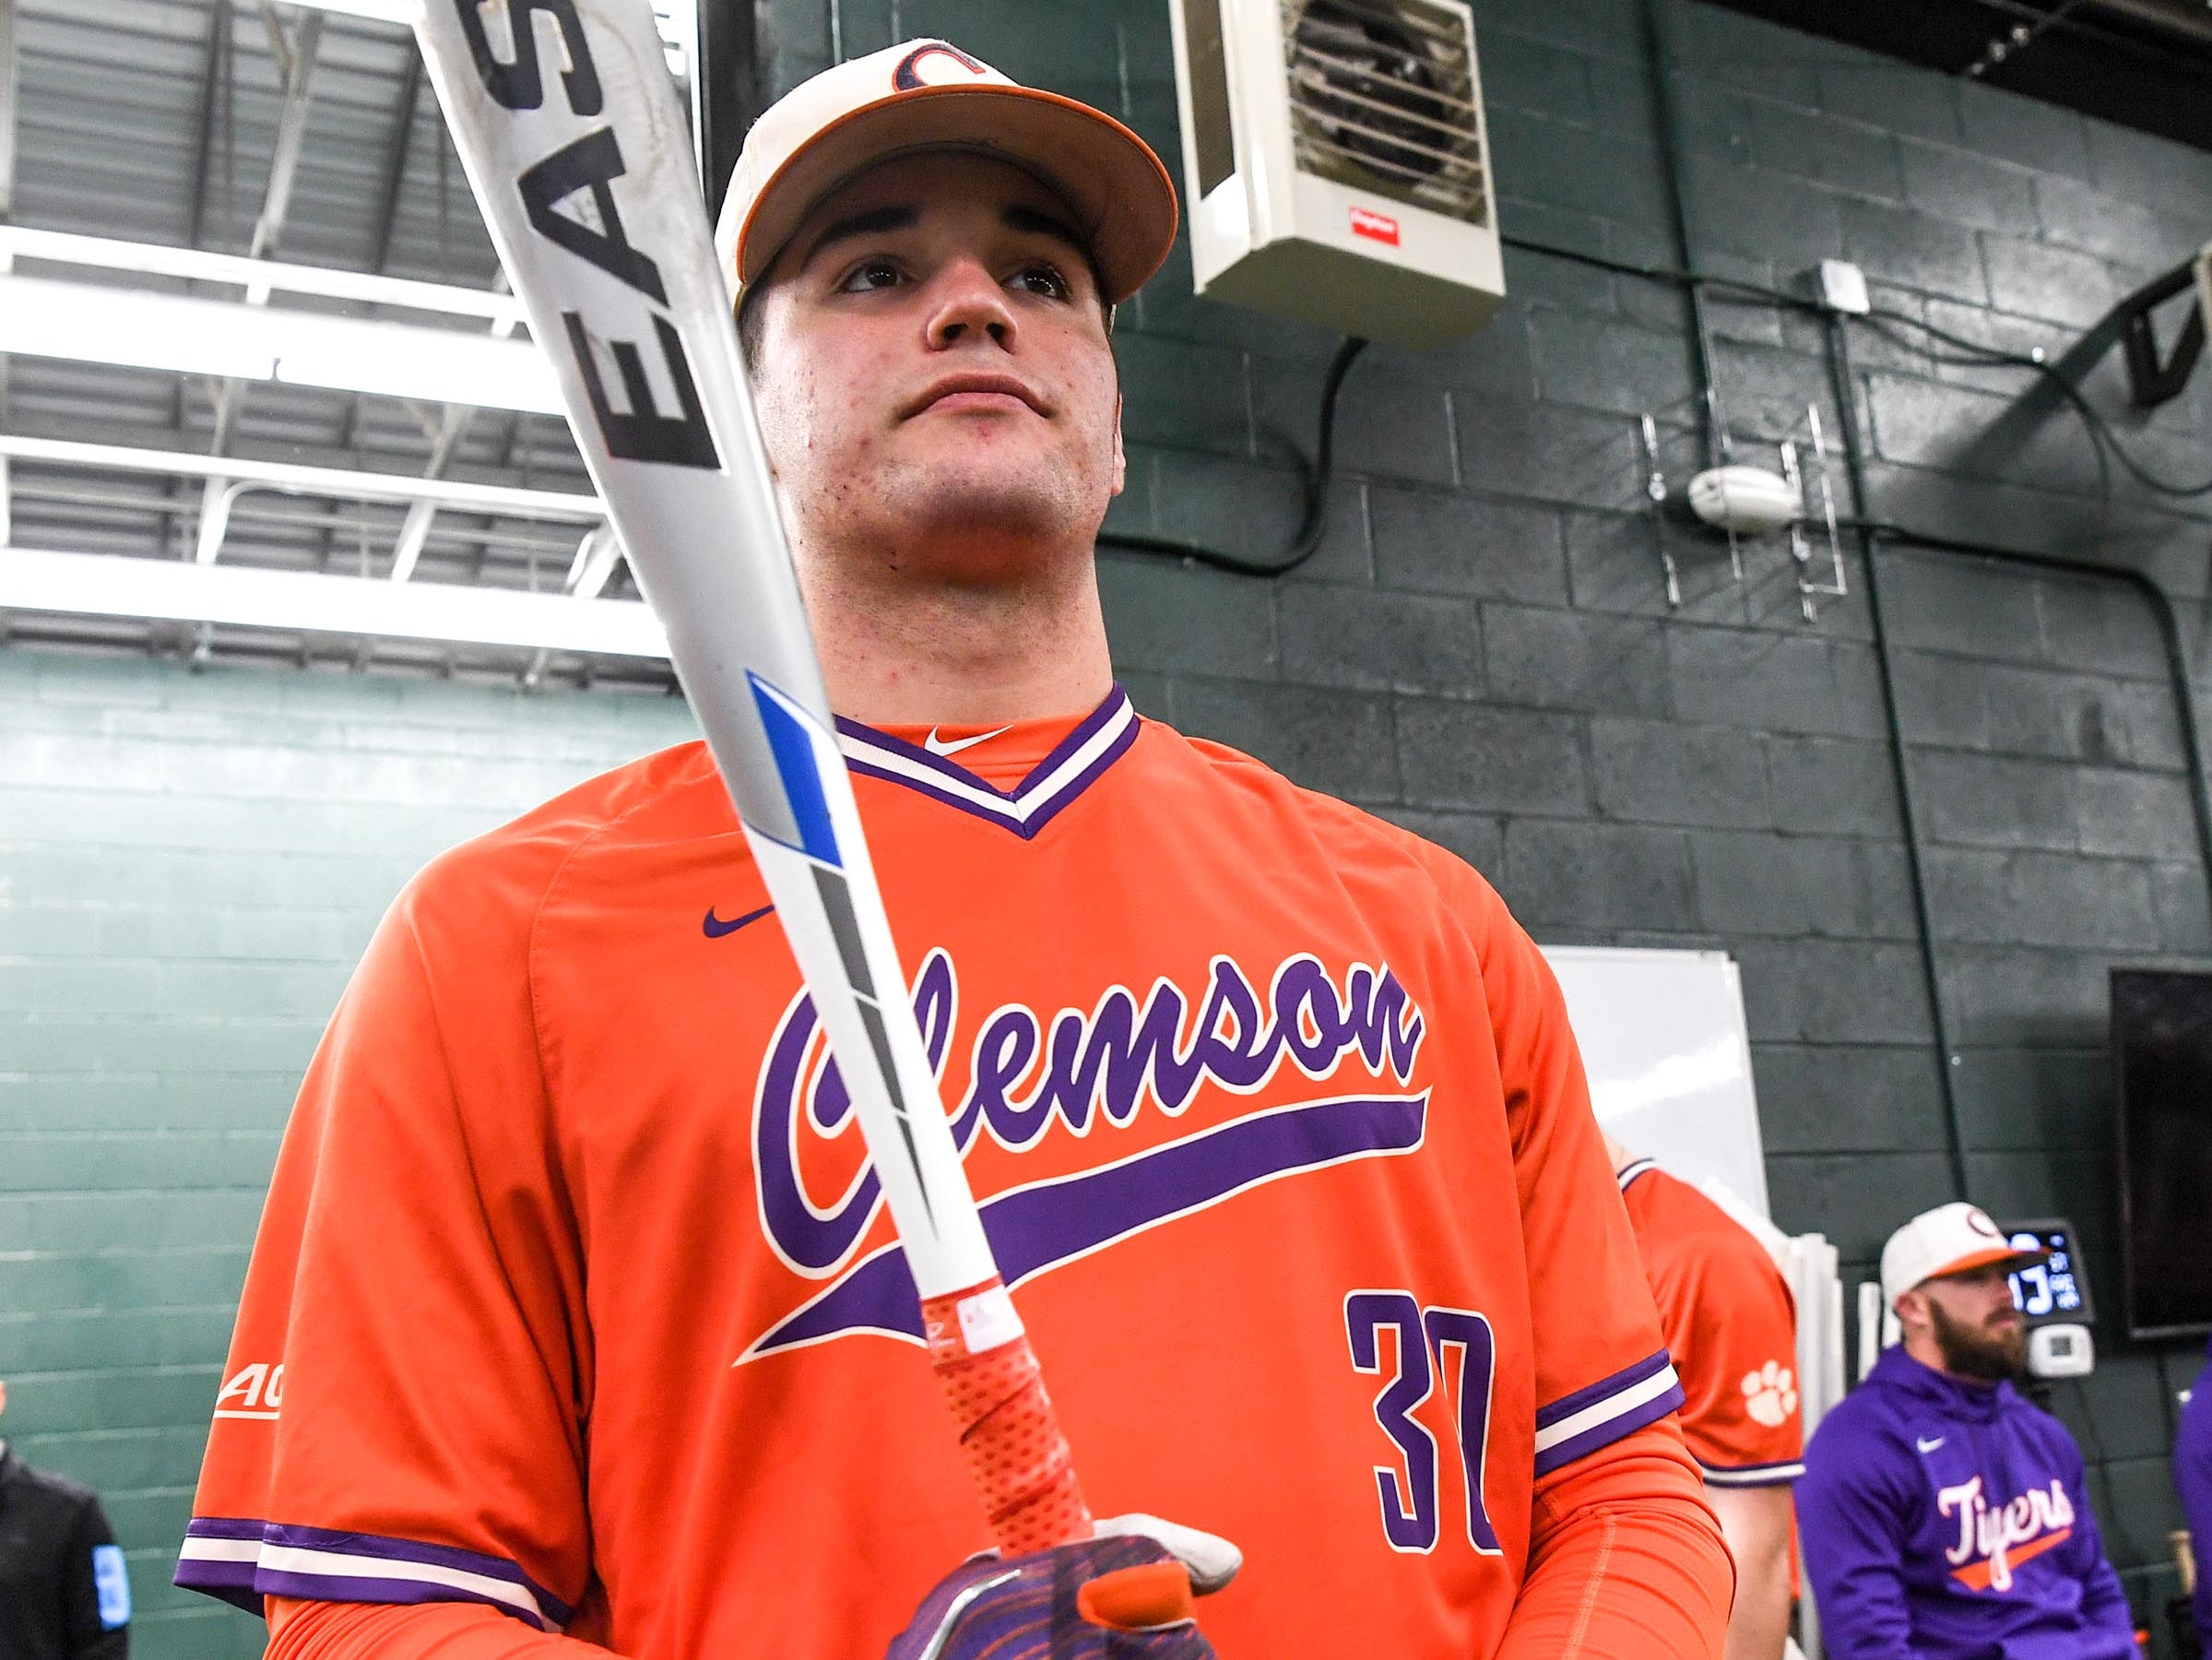 Clemson sophomore pitcher Davis Sharpe (30) swings in the batting cages during the first official team Spring practice at Doug Kingsmore Stadium in Clemson Friday, January 24, 2020.